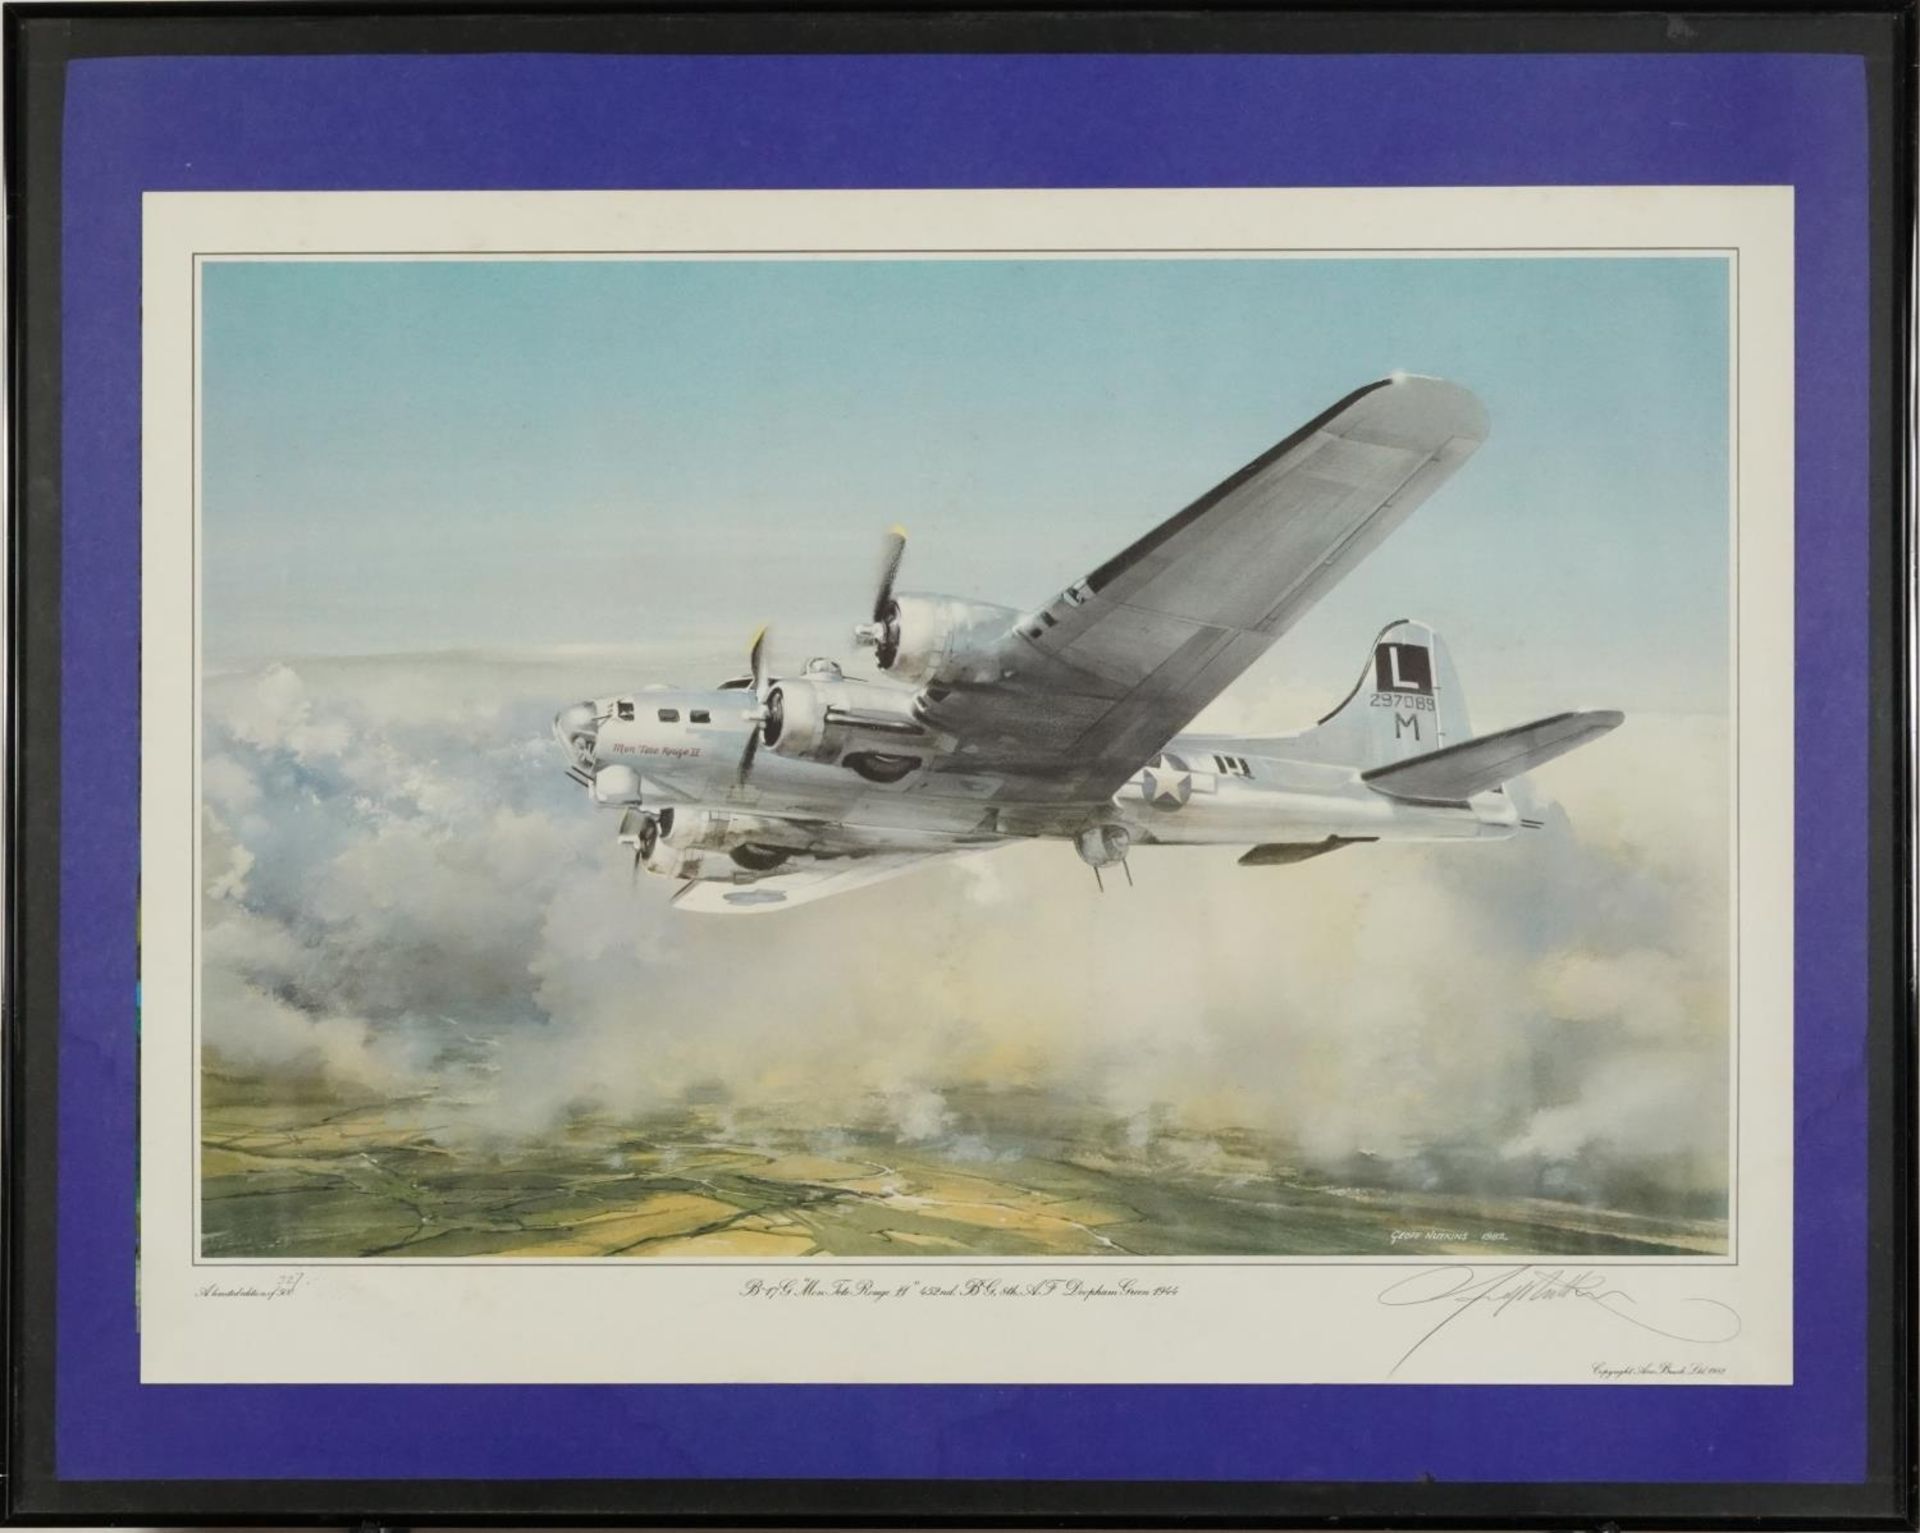 Geoff Nutkins 1982 - B-17G Bomber, military interest pencil signed print in colour, limited - Image 2 of 6